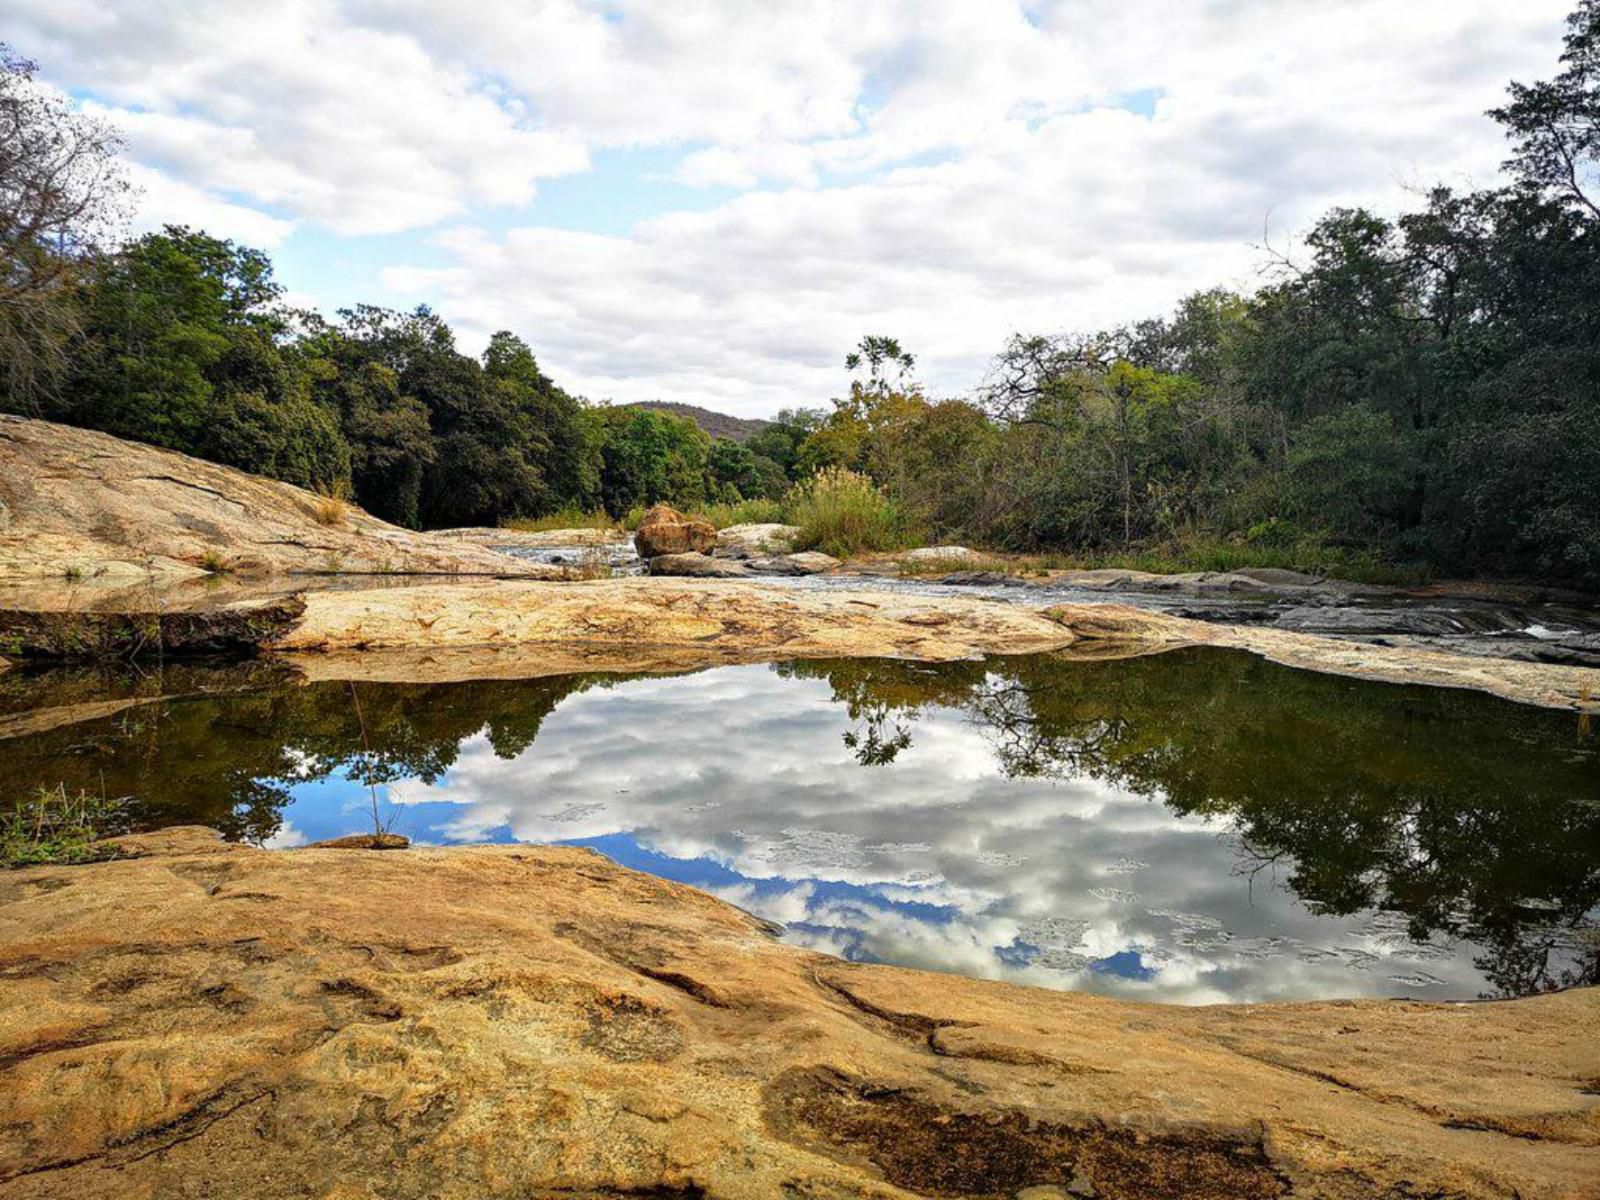 Lions Rock Rapids Hazyview Mpumalanga South Africa River, Nature, Waters, Tree, Plant, Wood